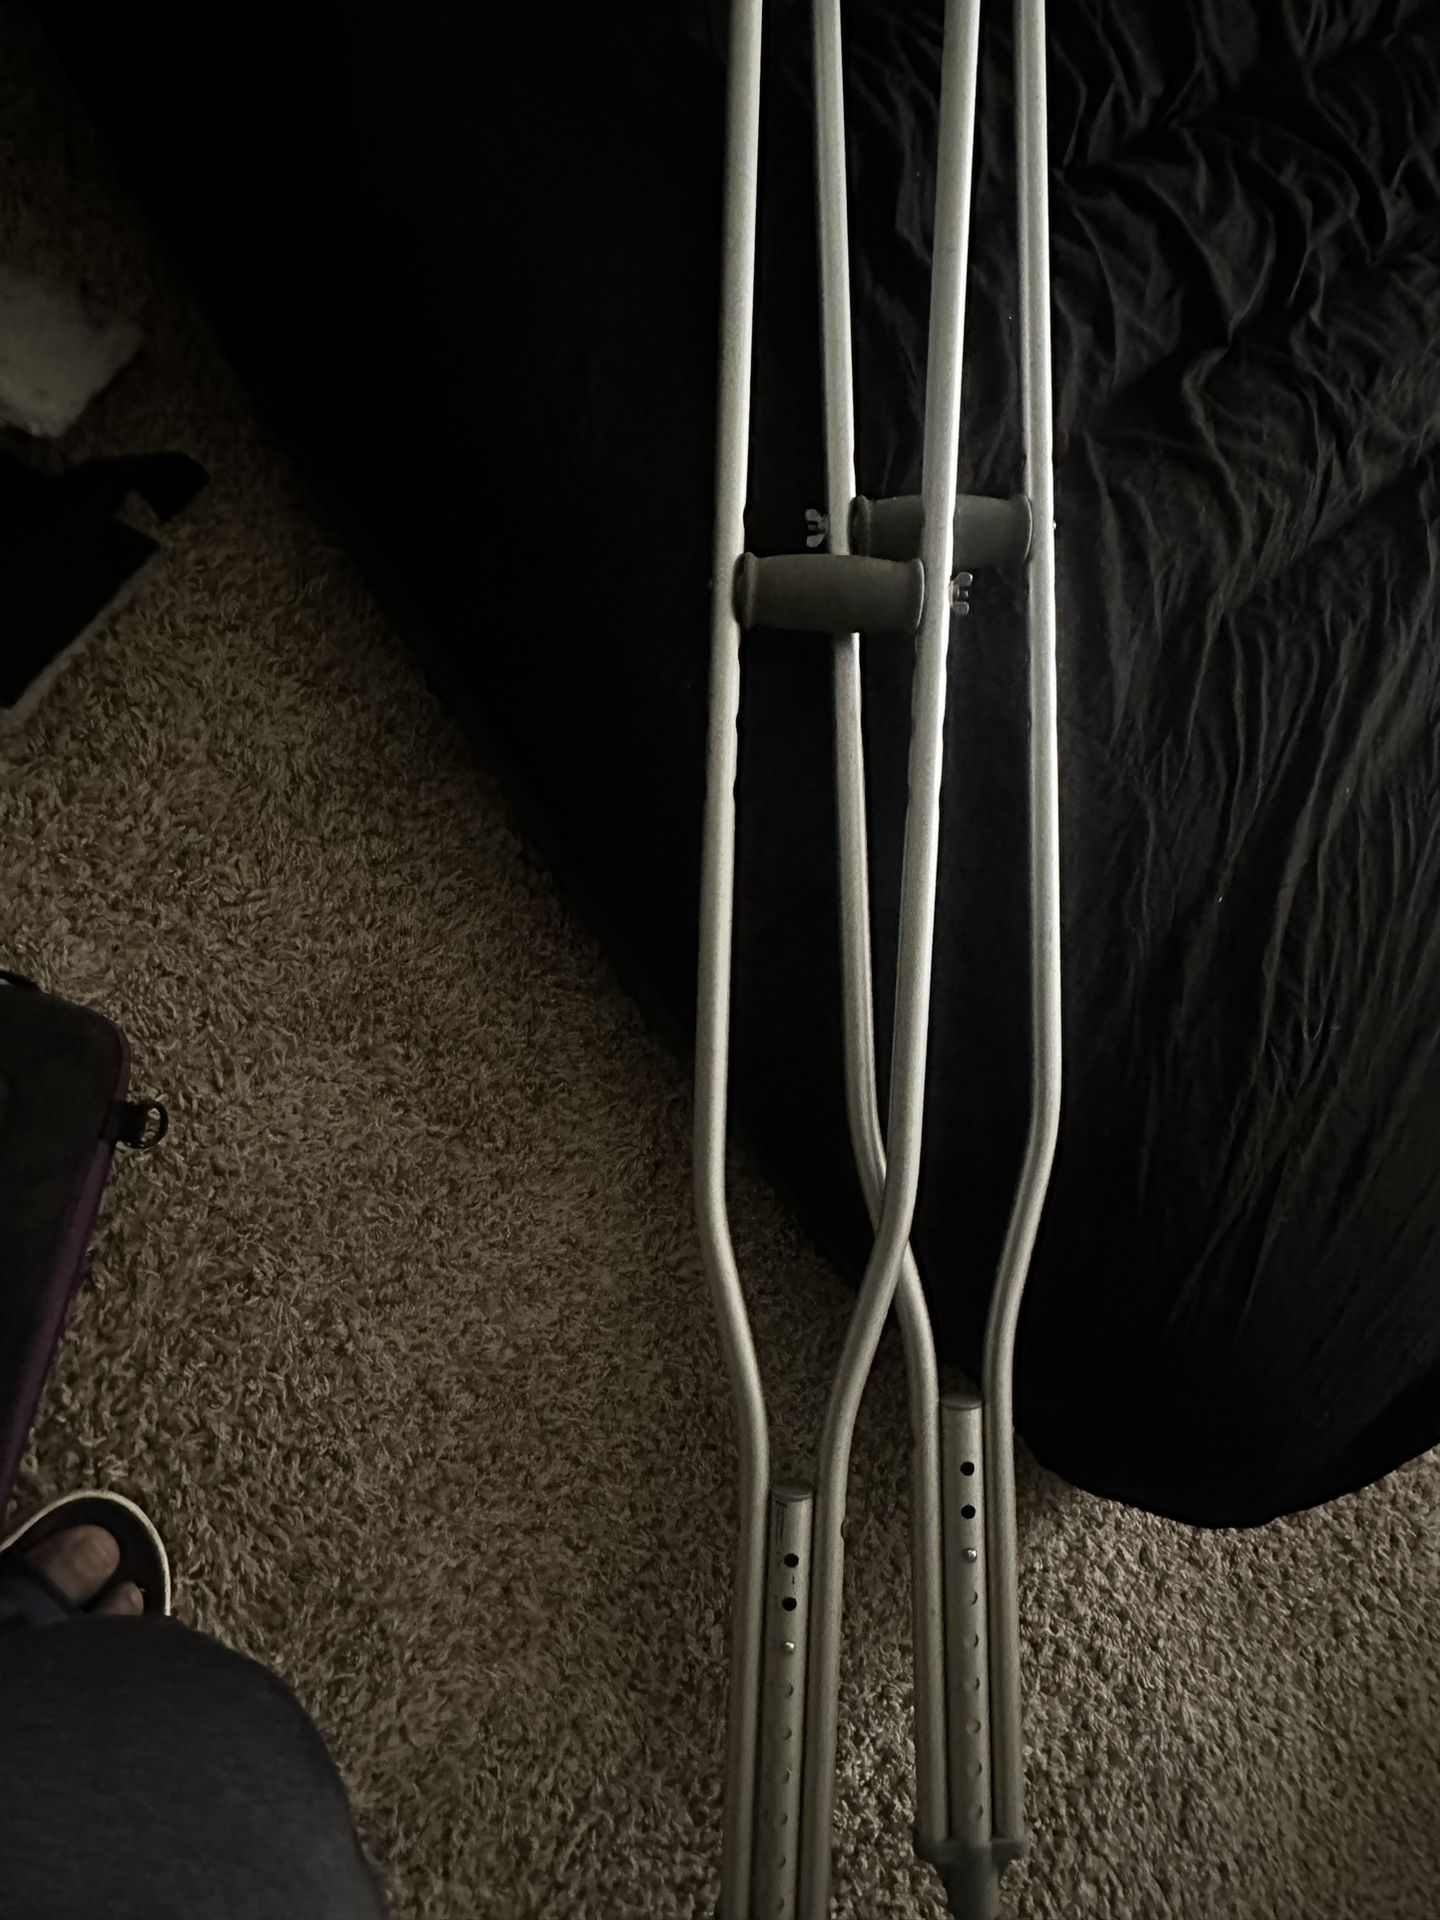 Crutches, Boot And Bone Healing System 